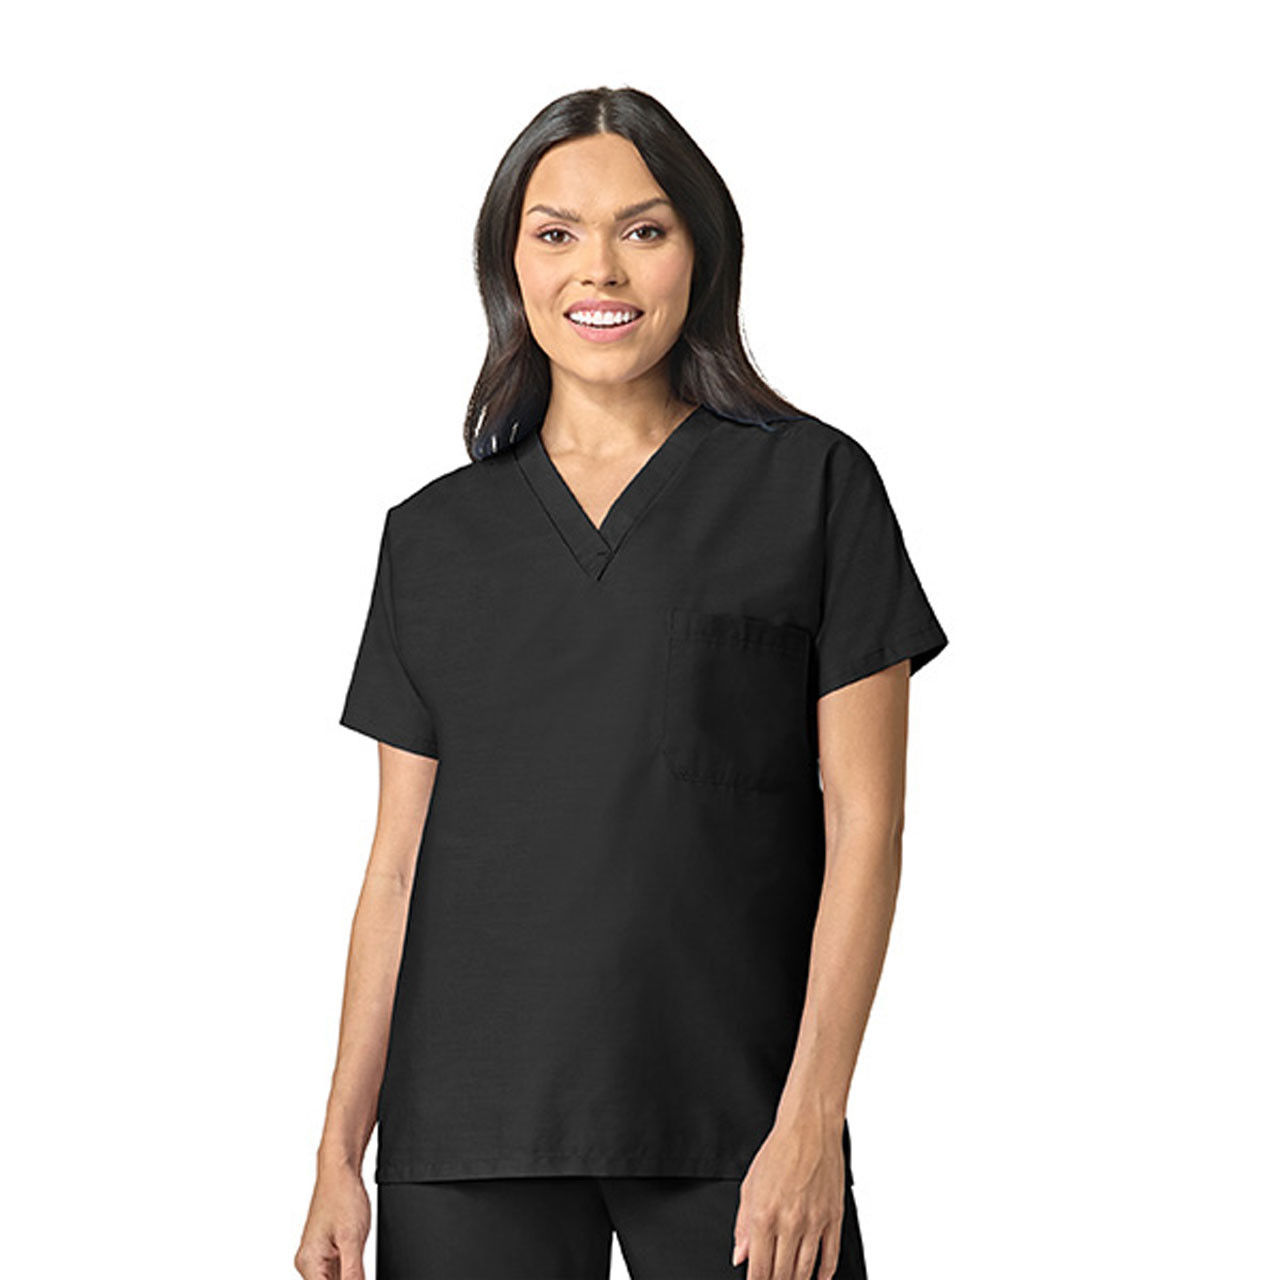 What material are the Black Scrub Tops made of?